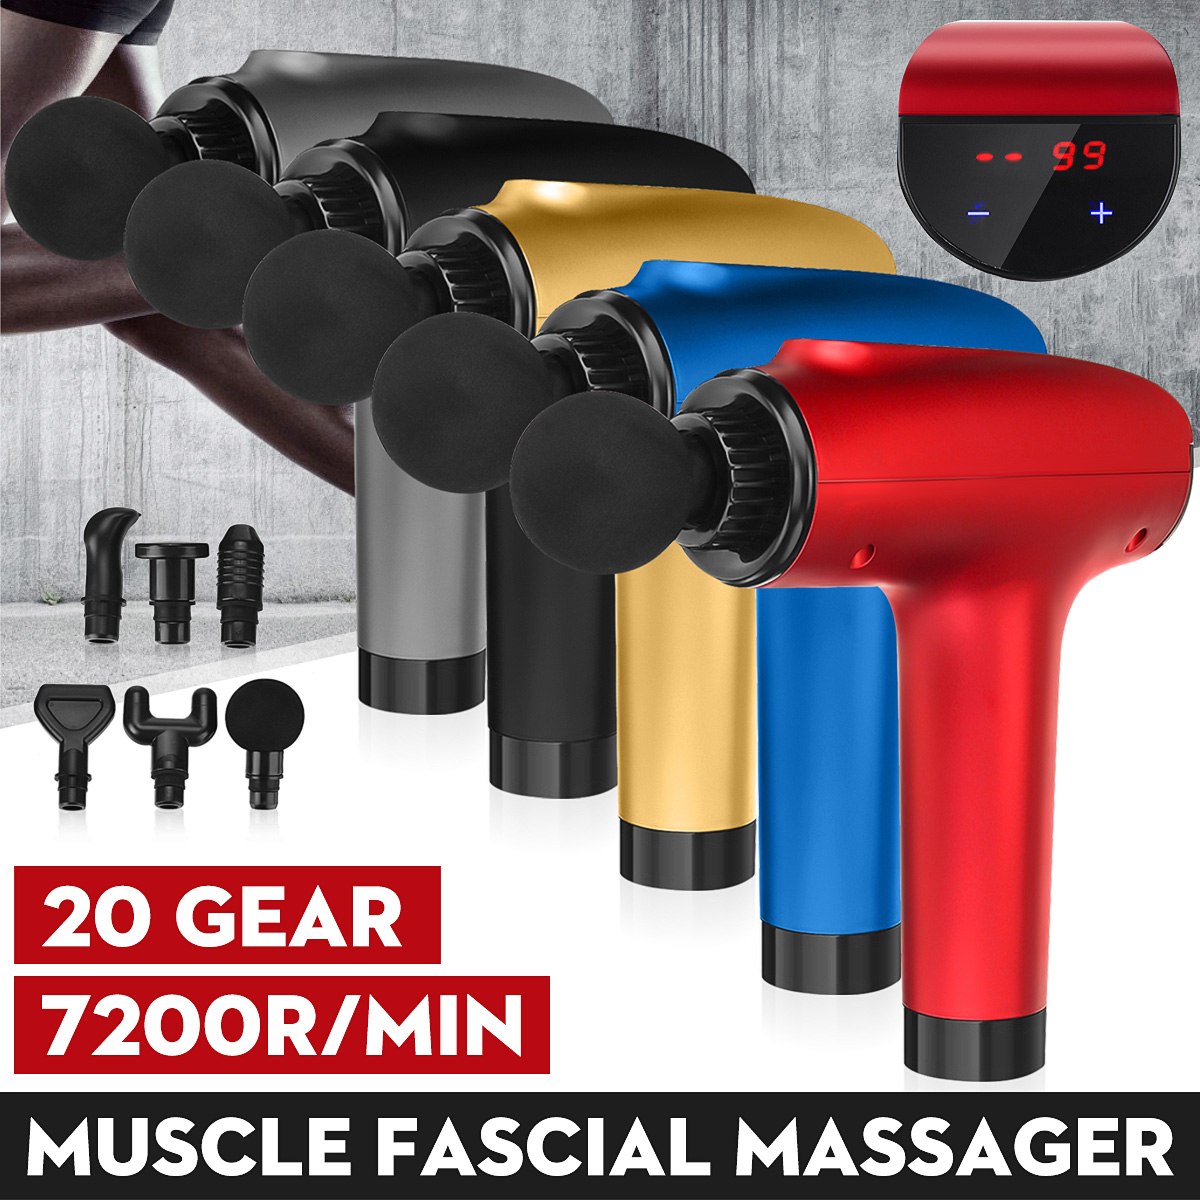 2000mAh-Electric-Muscle-Massager-7200rmin-20-Speeds-With-6-Heads-Deep-Percussion-Vibration-Relaxing--1712900-1